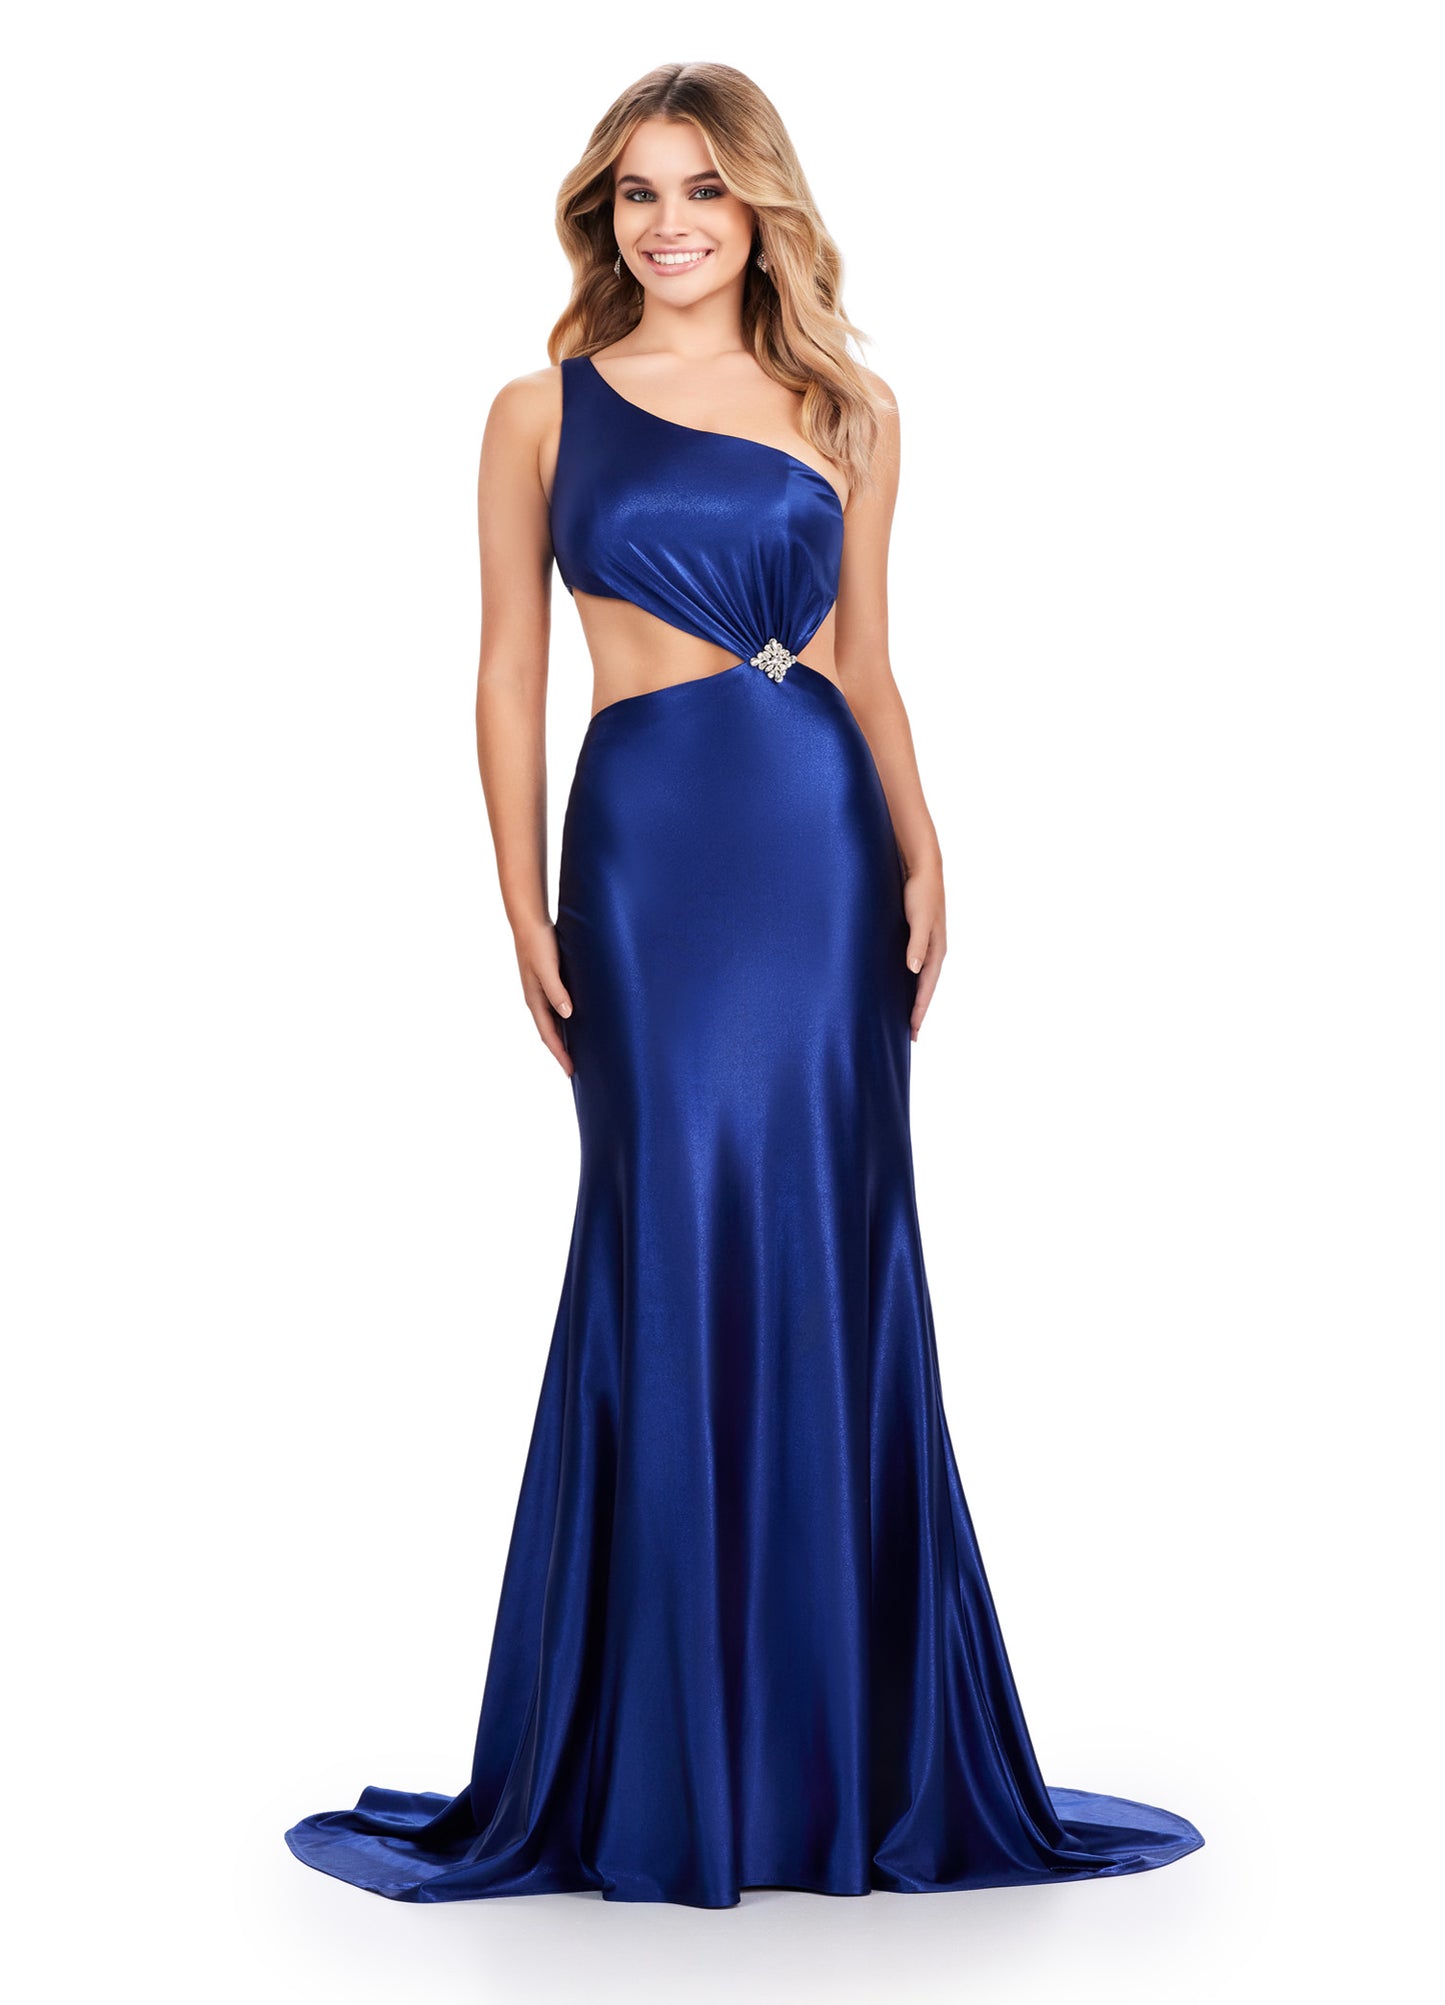 xpertly designed by Ashely Lauren, this elegant 11577 Long Prom Dress features a fitted one shoulder satin gown with stylish cut outs and intricate beading. Perfect for formal events and pageants, it offers a sophisticated and flattering silhouette for any occasion. Elevate your style with this stunning gown. This simplistic, yet elegant one shoulder satin gown features an elegantly draped bodice leading to a side cut out. The look is accented by a beaded brooch.